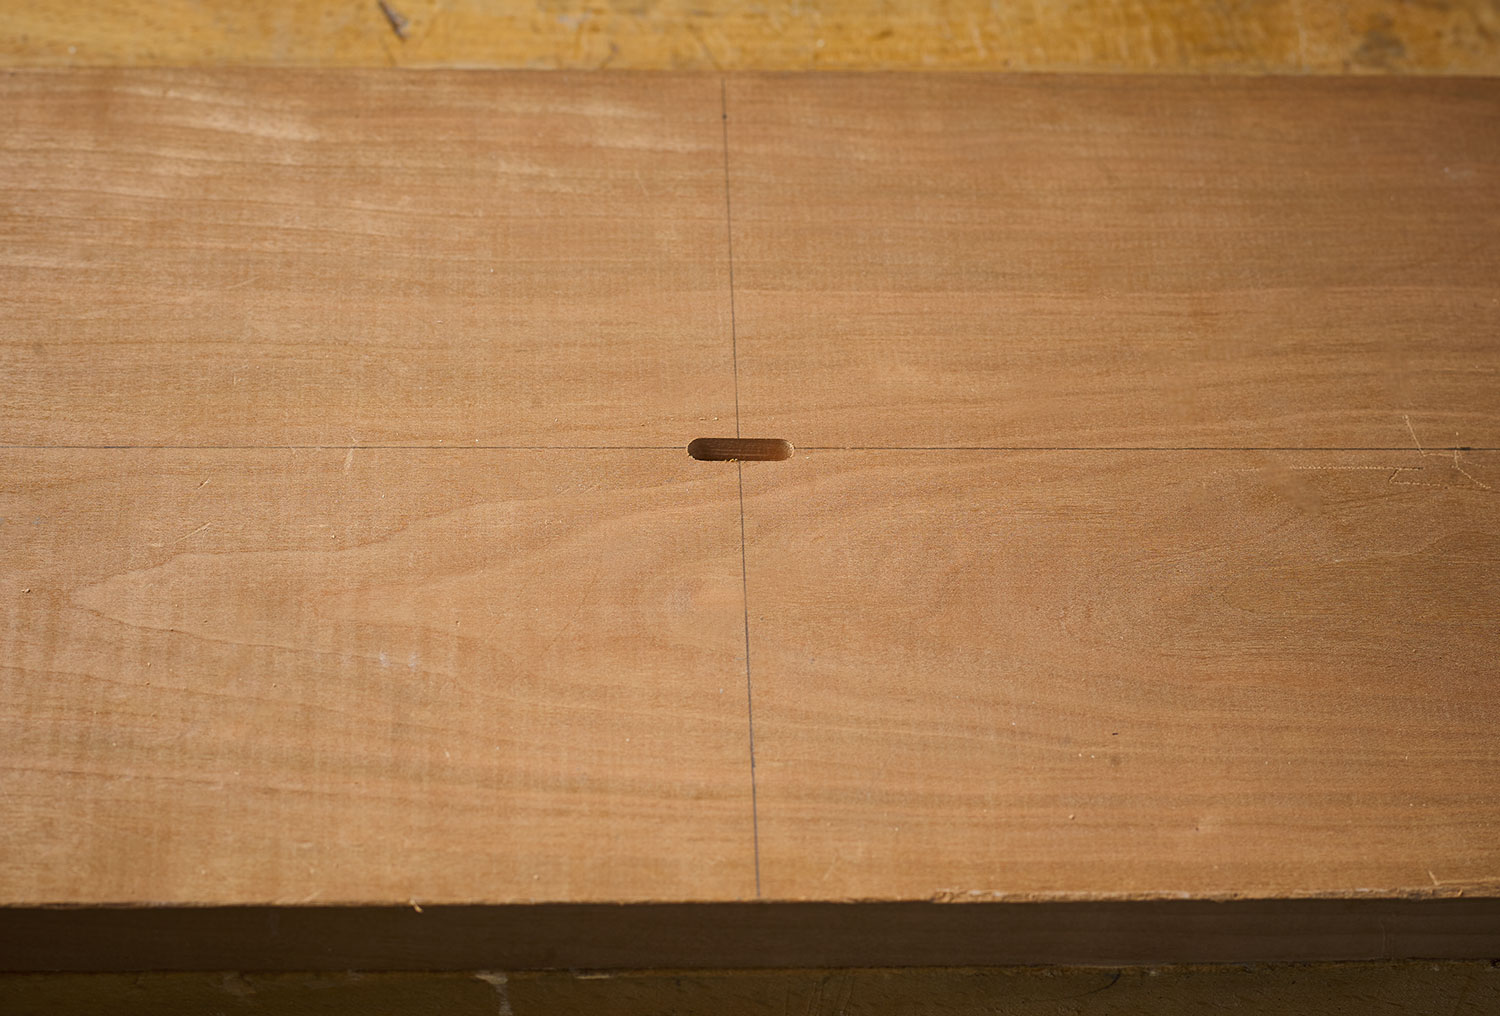 Mortise cut position on the horizontal and vertical axes.